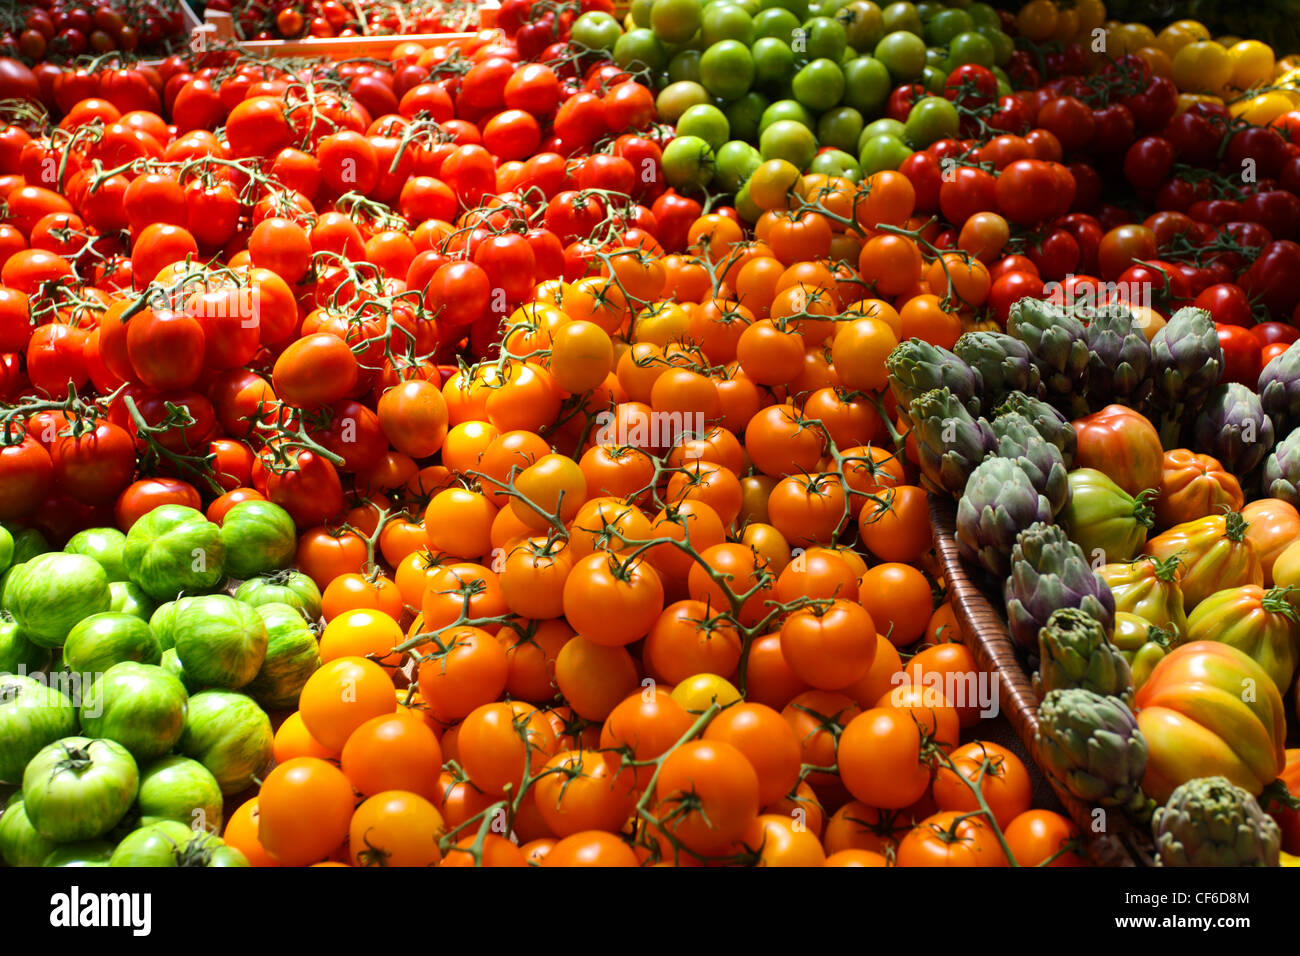 Organic vegetables for sale in a market. Stock Photo